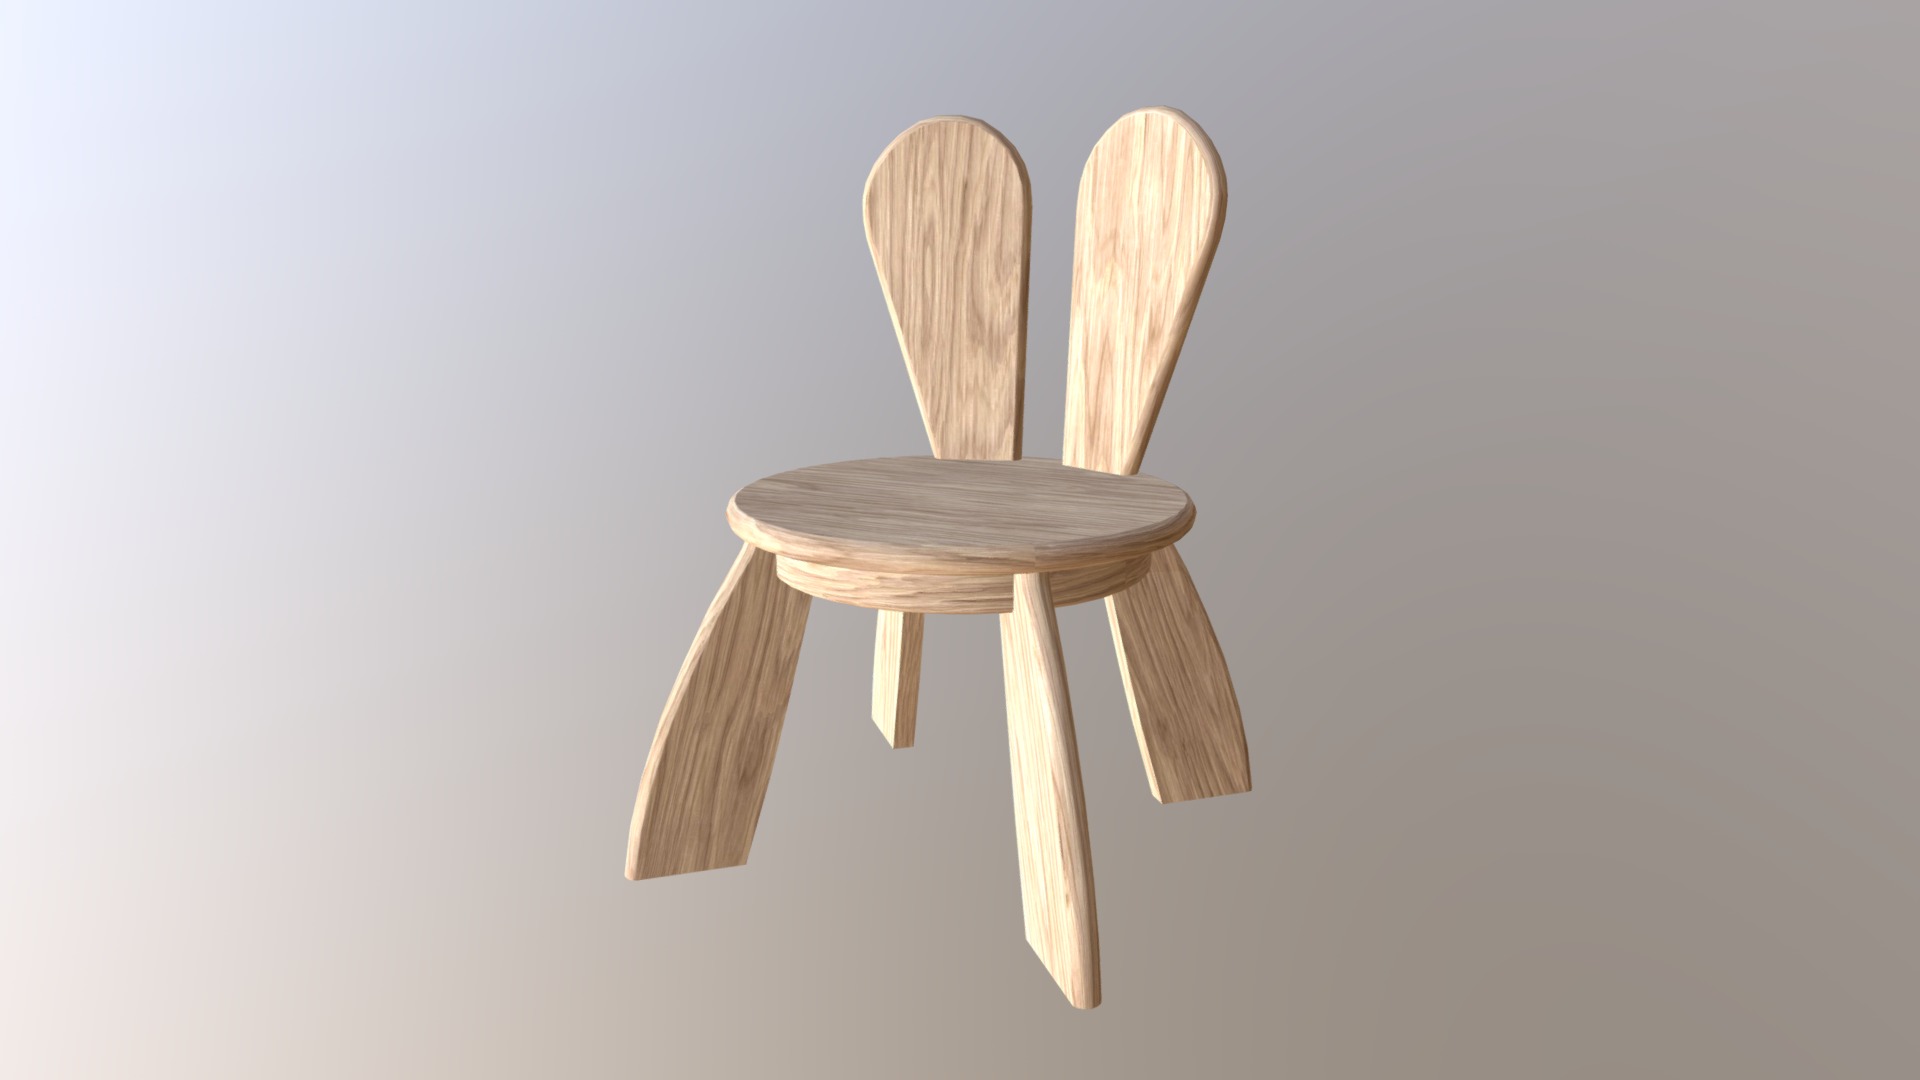 3D model Kid wooden chair - This is a 3D model of the Kid wooden chair. The 3D model is about a chair made of wood.